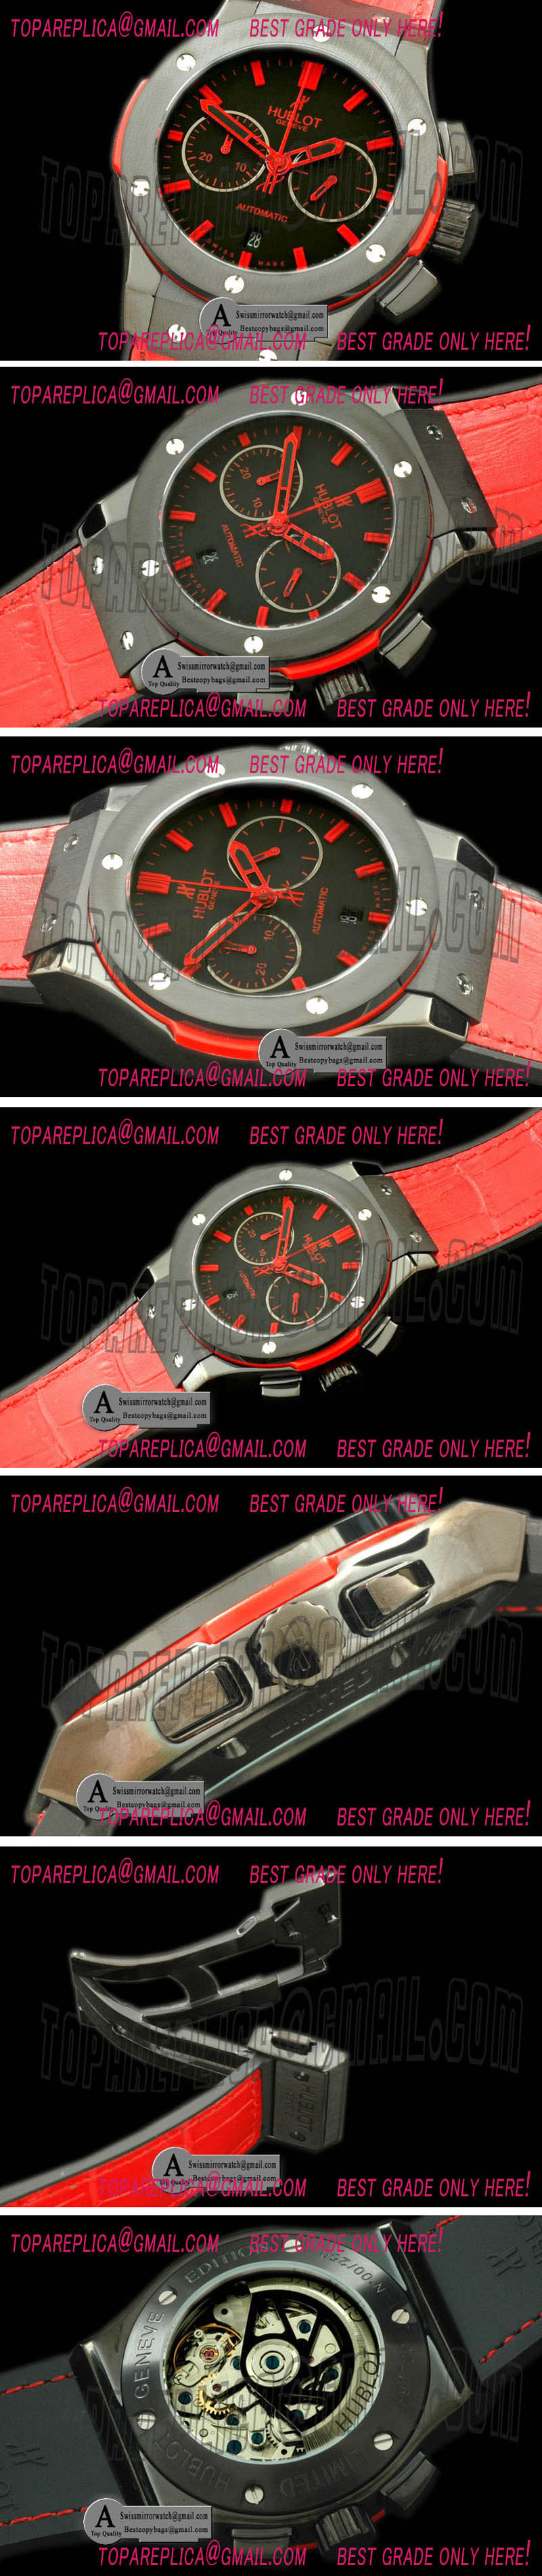 Hublot Classic Fusion Chrono V2 521.CM.1110.LR PVD Leather All Black Red A 7750 Replica Watches